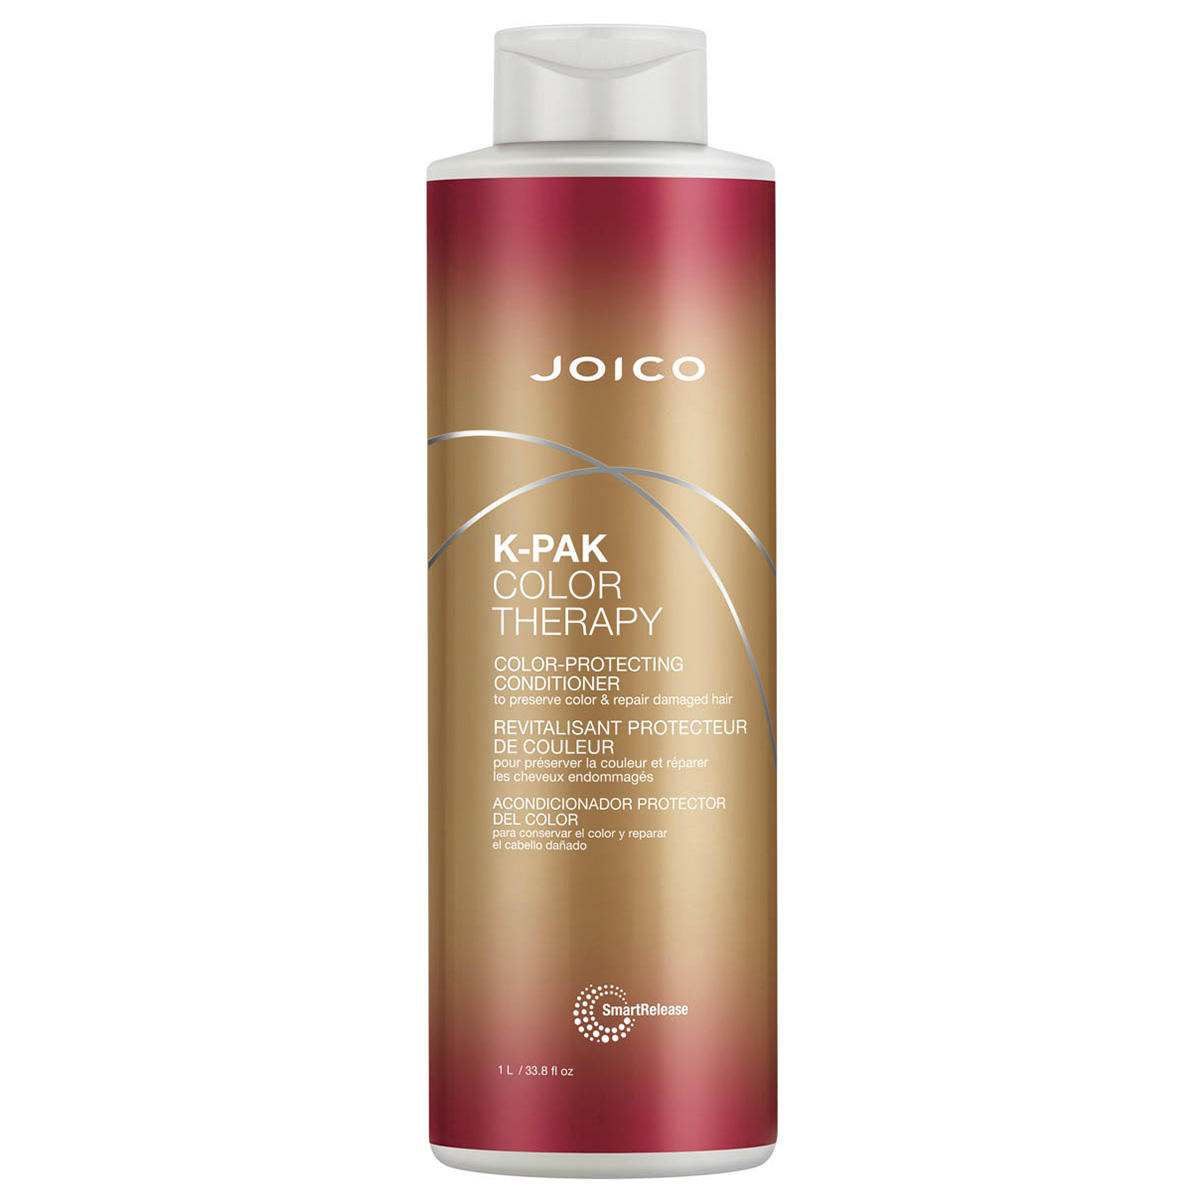 JOICO K-PAK Color Therapy Color-Protecting Conditioner 1 Liter - 1